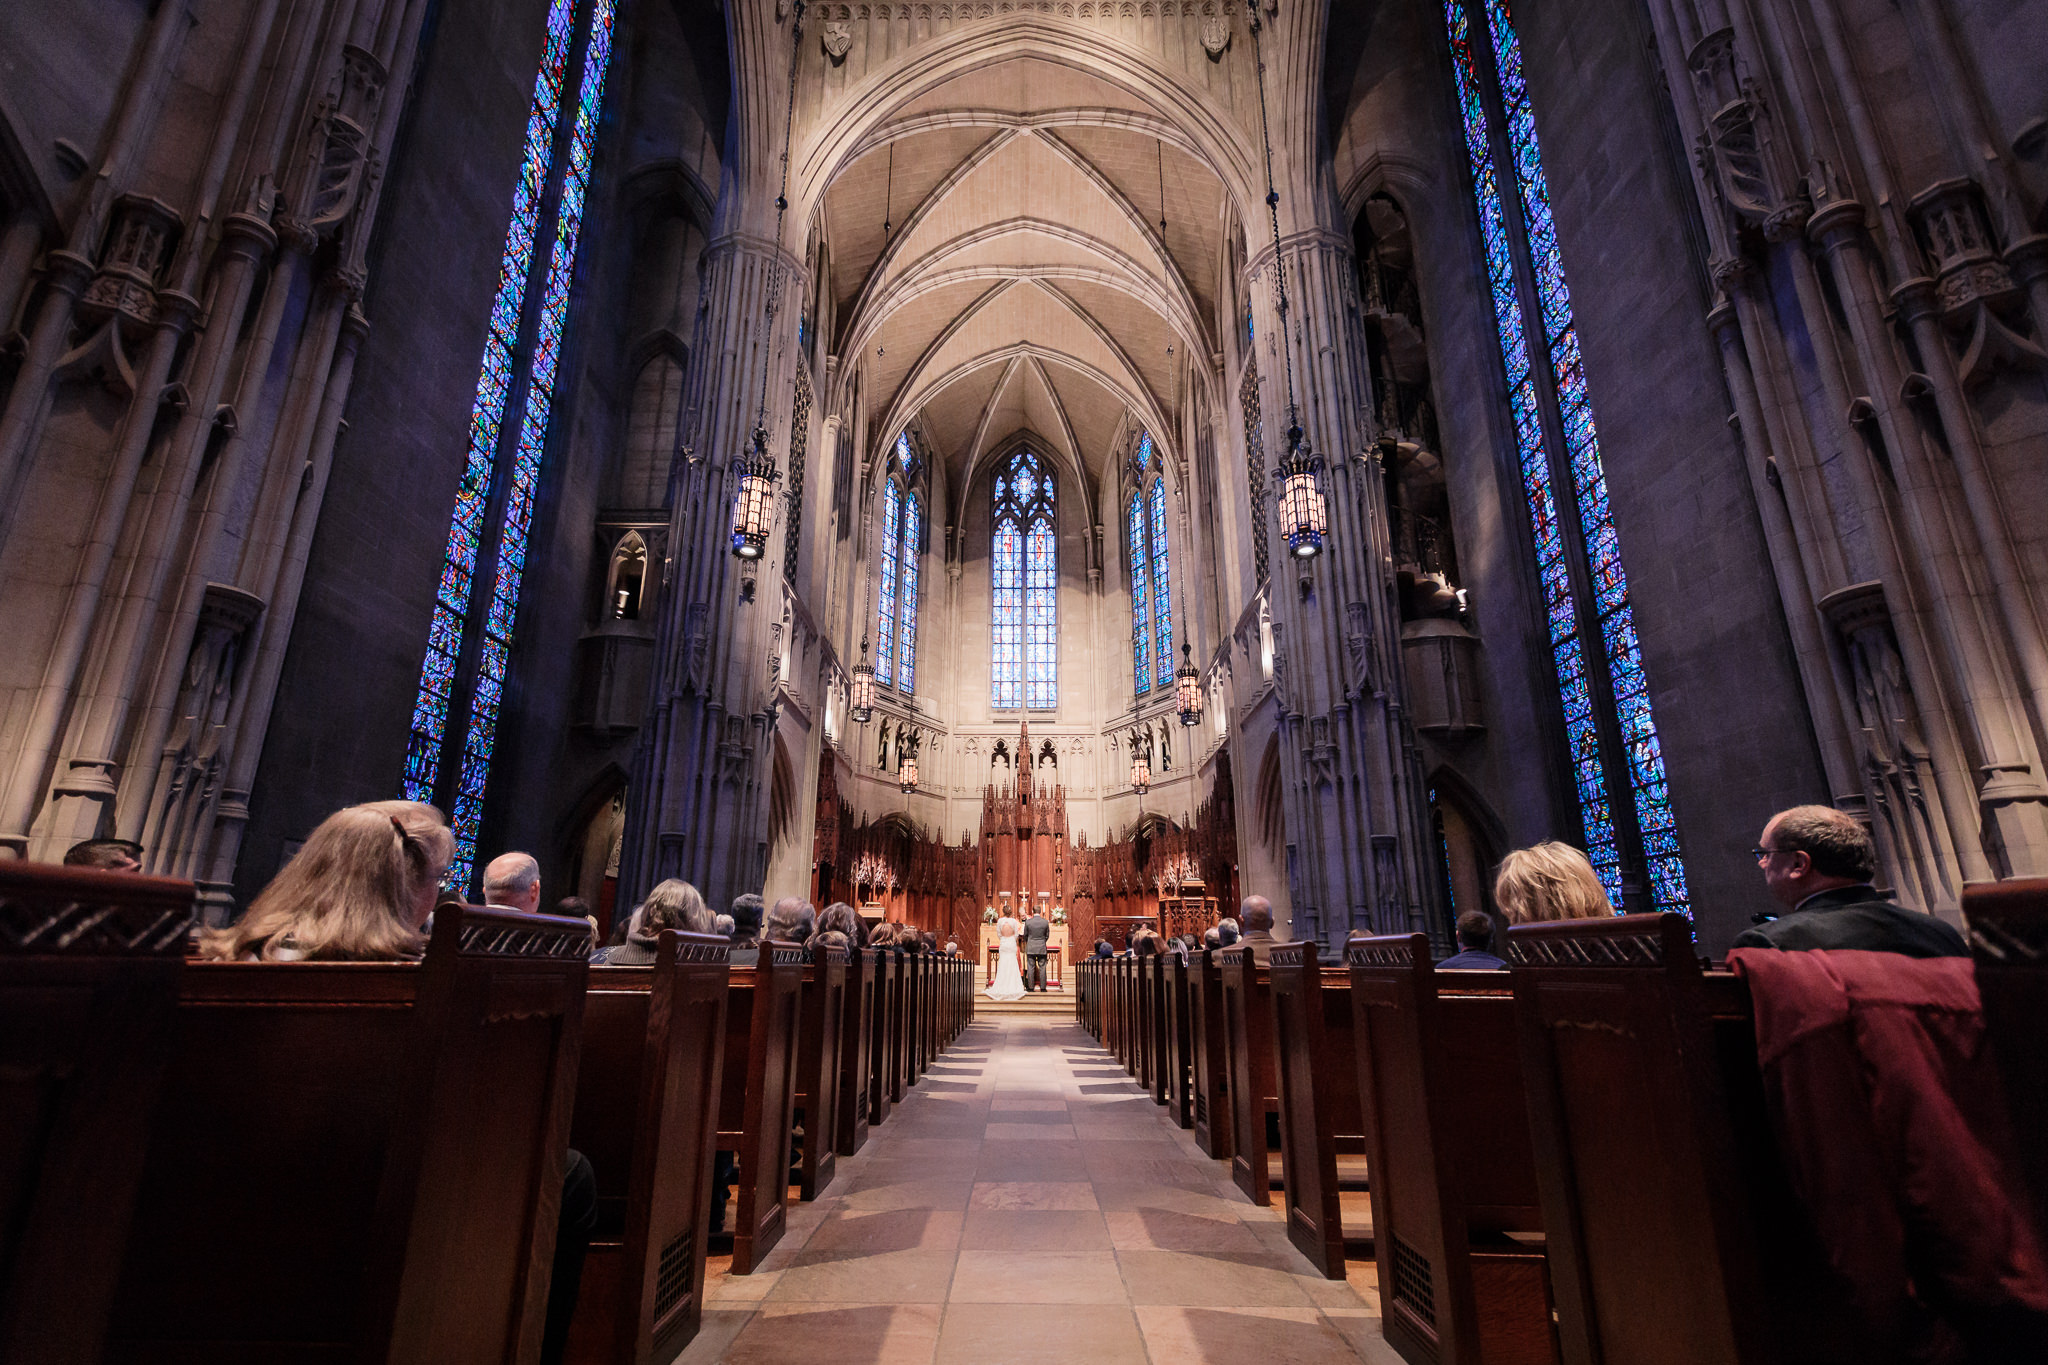 Wedding ceremony at Heinz Memorial Chapel in Pittsburgh, PA